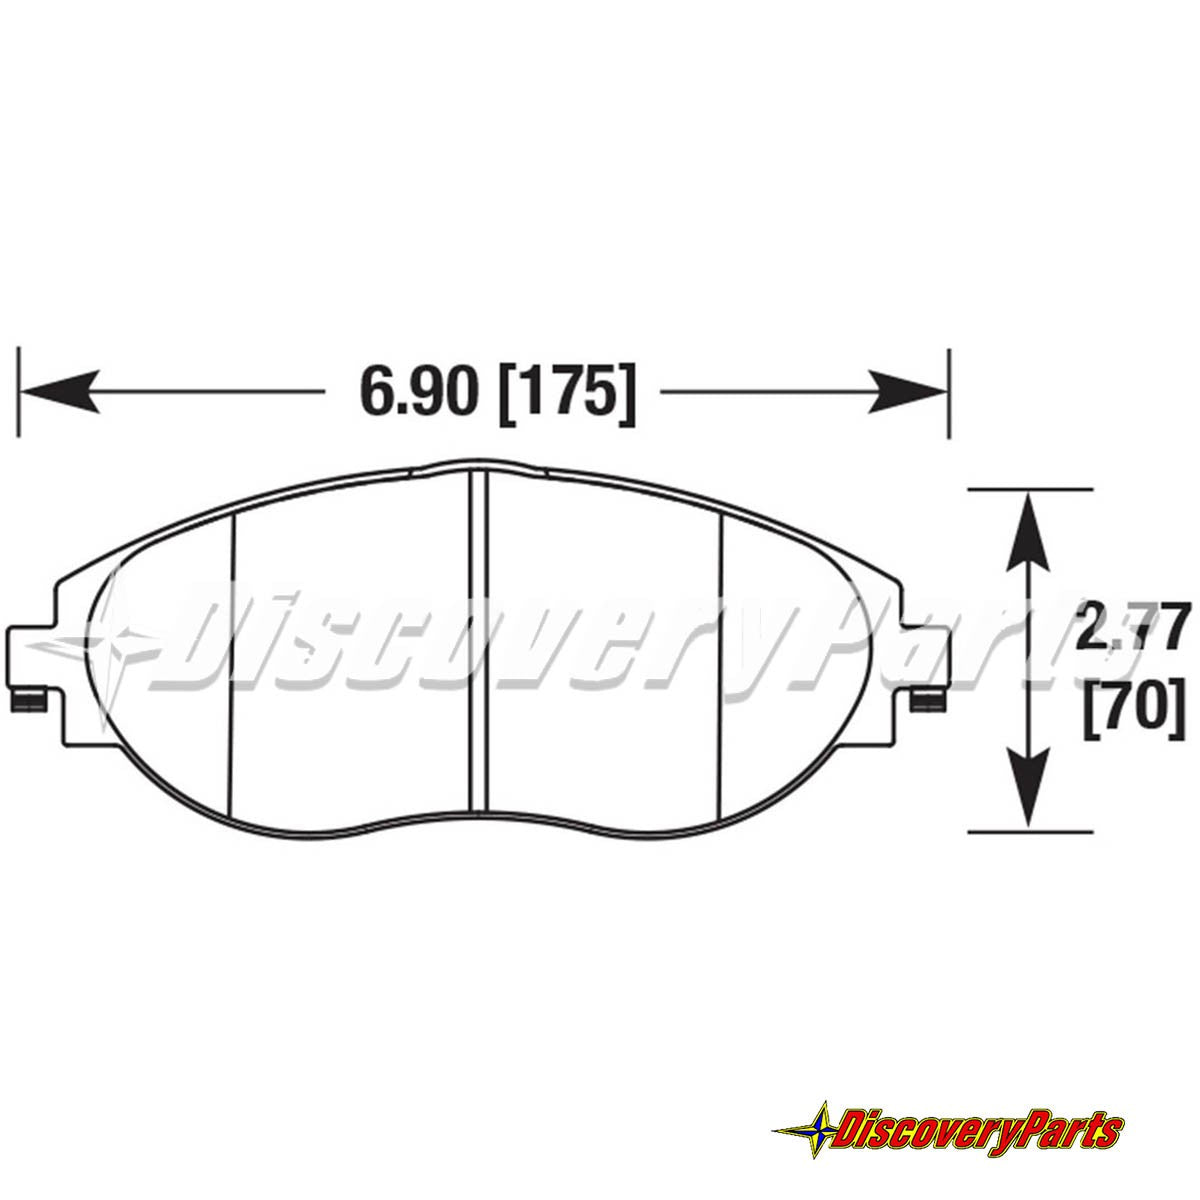 Carbotech CT1633 VW Front Caliper Brake Pads